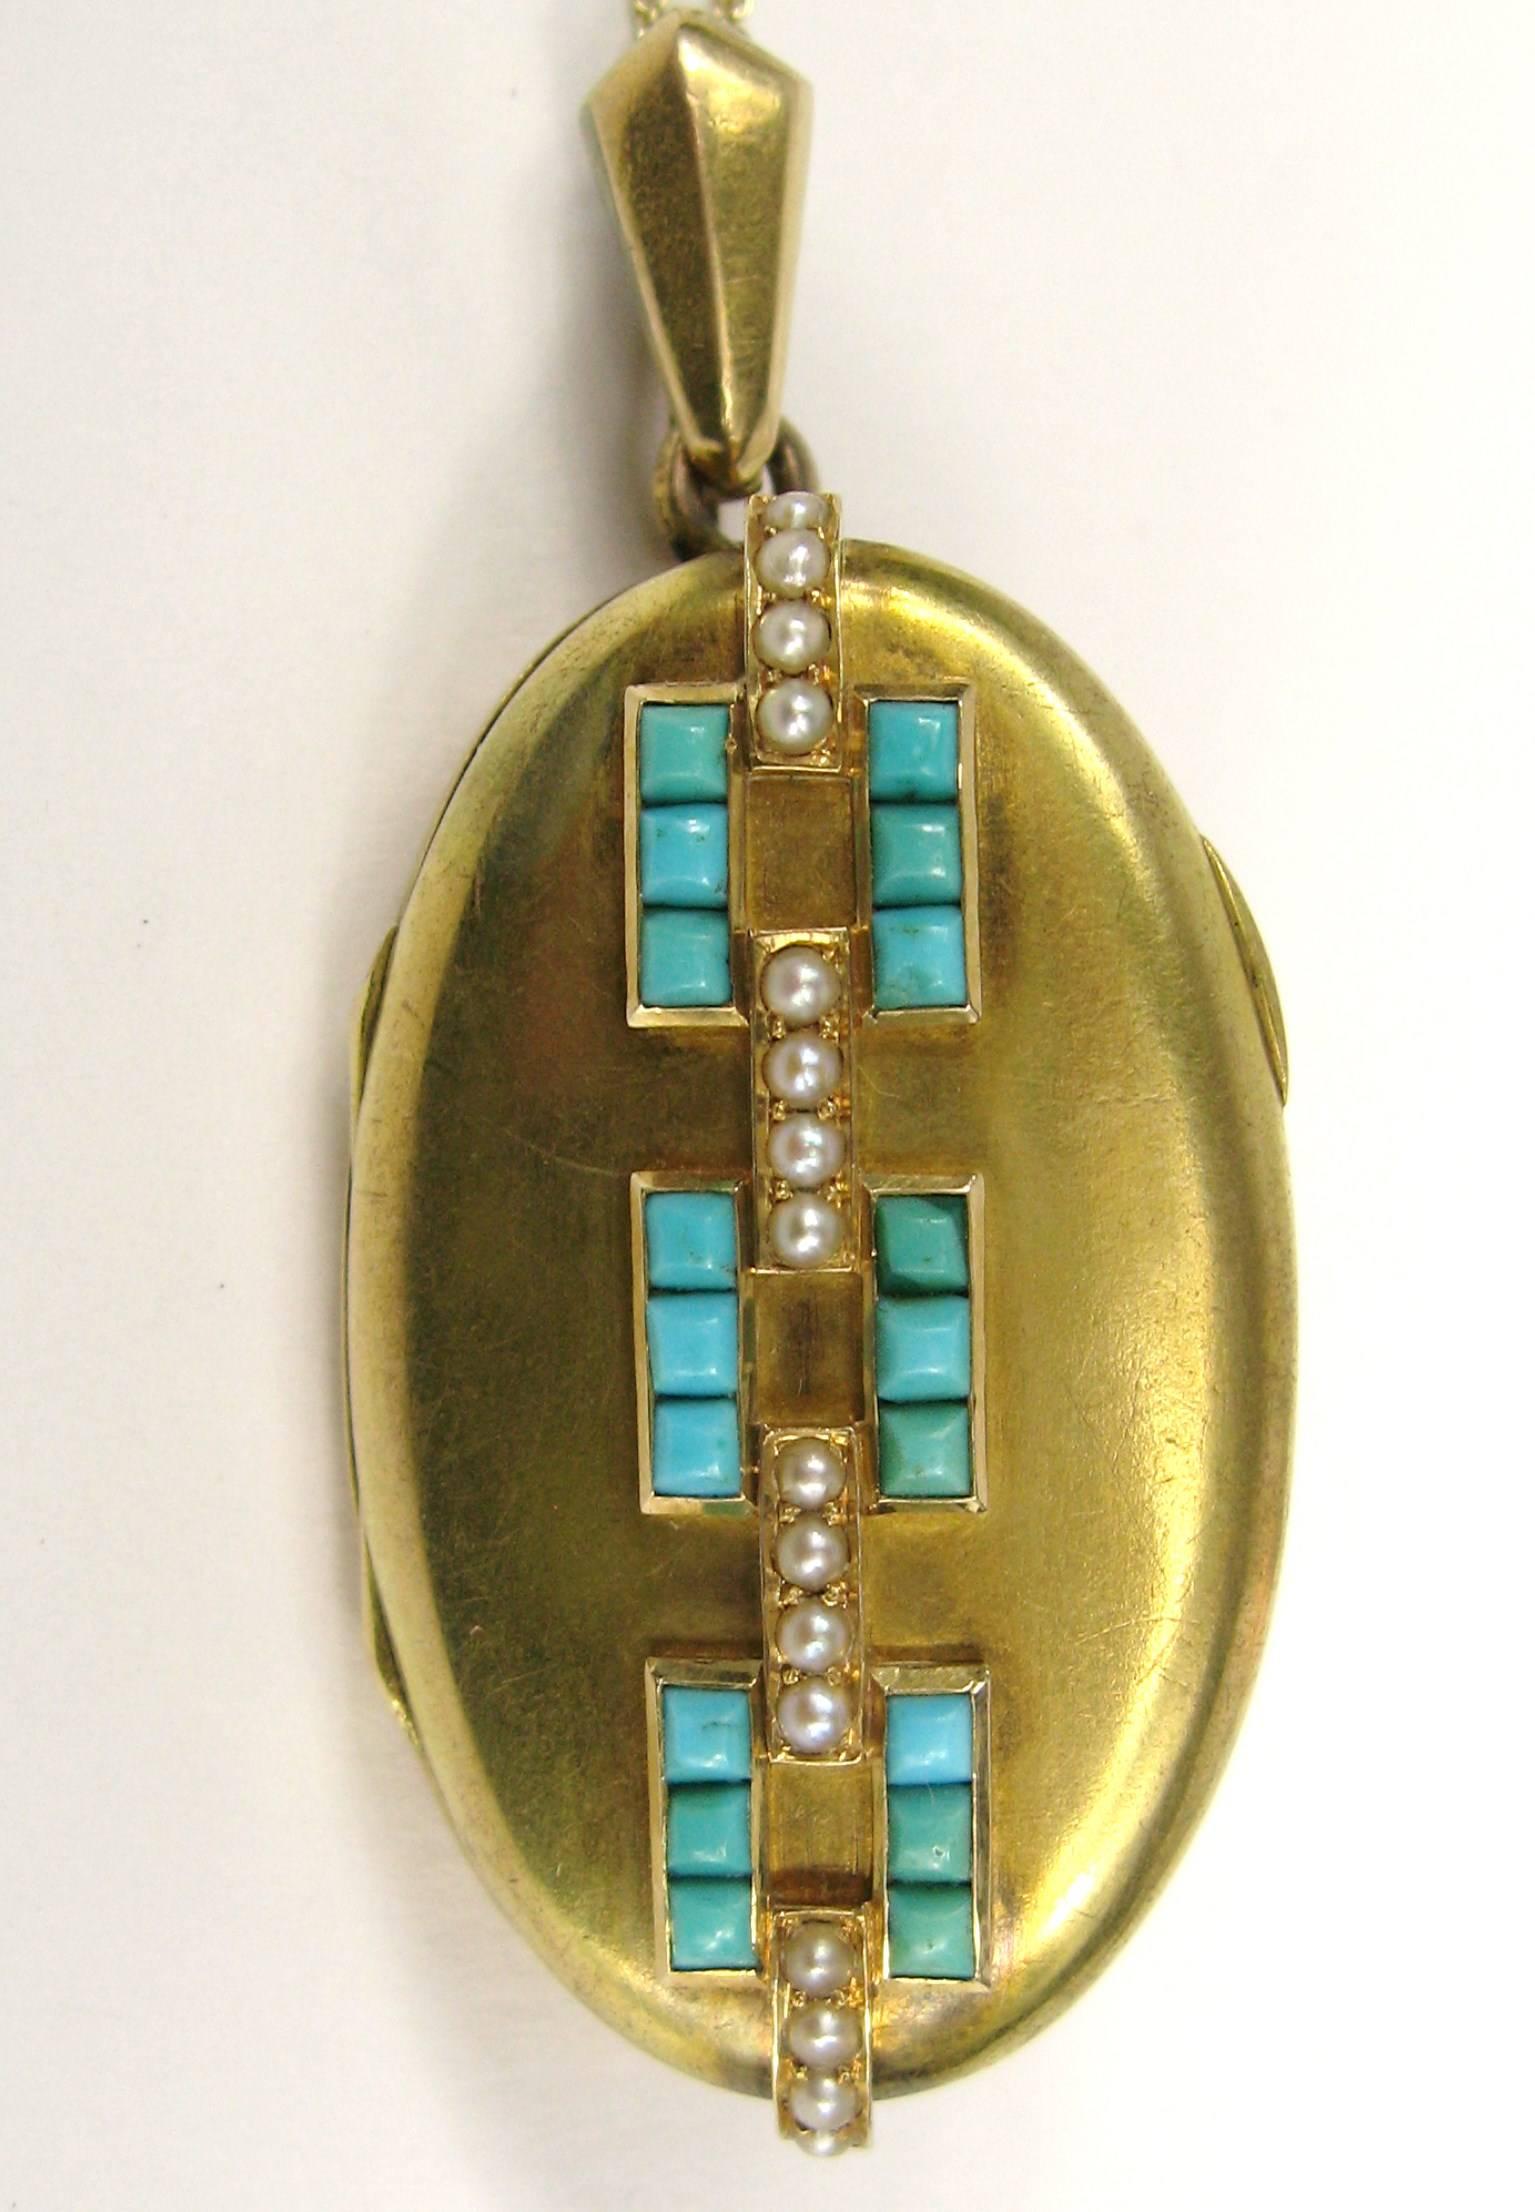 Victorian locket with a interlocking design of seed pearls and Turquoise set in 14K gold.  You can place a photo of a keep sake inside. I've added a gold chain with the locket. Large Bale can accommodate a larger chain if desired. Locket measures